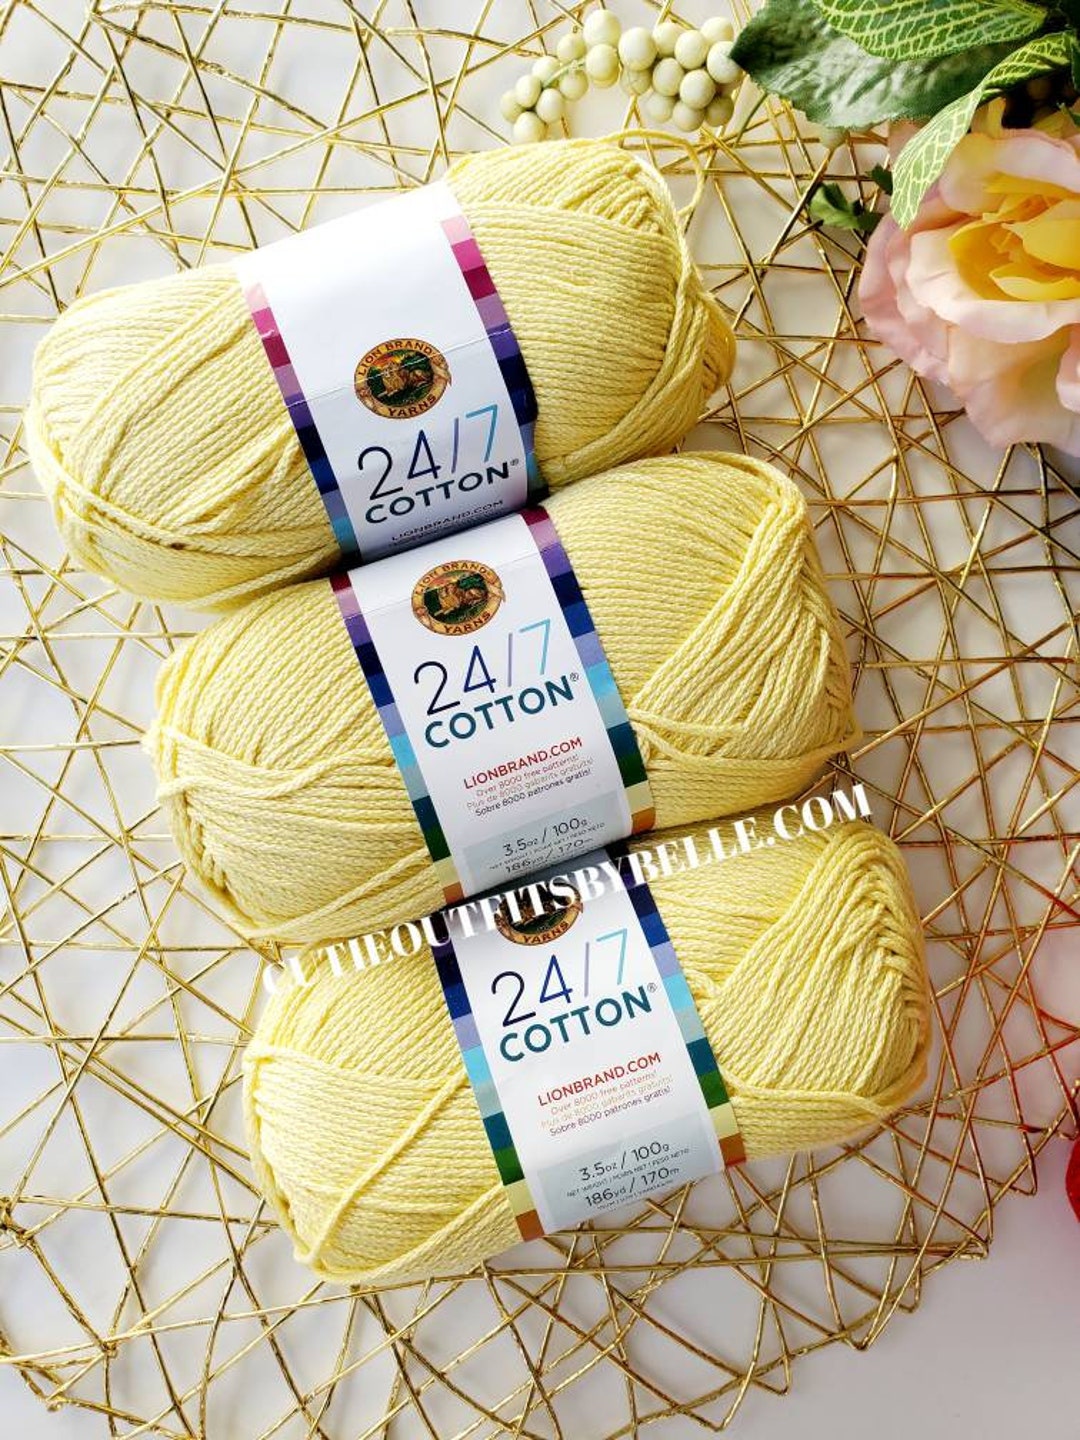 Lion Brand 24/7 Cotton Yarn, Yarn for Knitting, Crocheting, and Crafts,  Ecru, Pack of 3